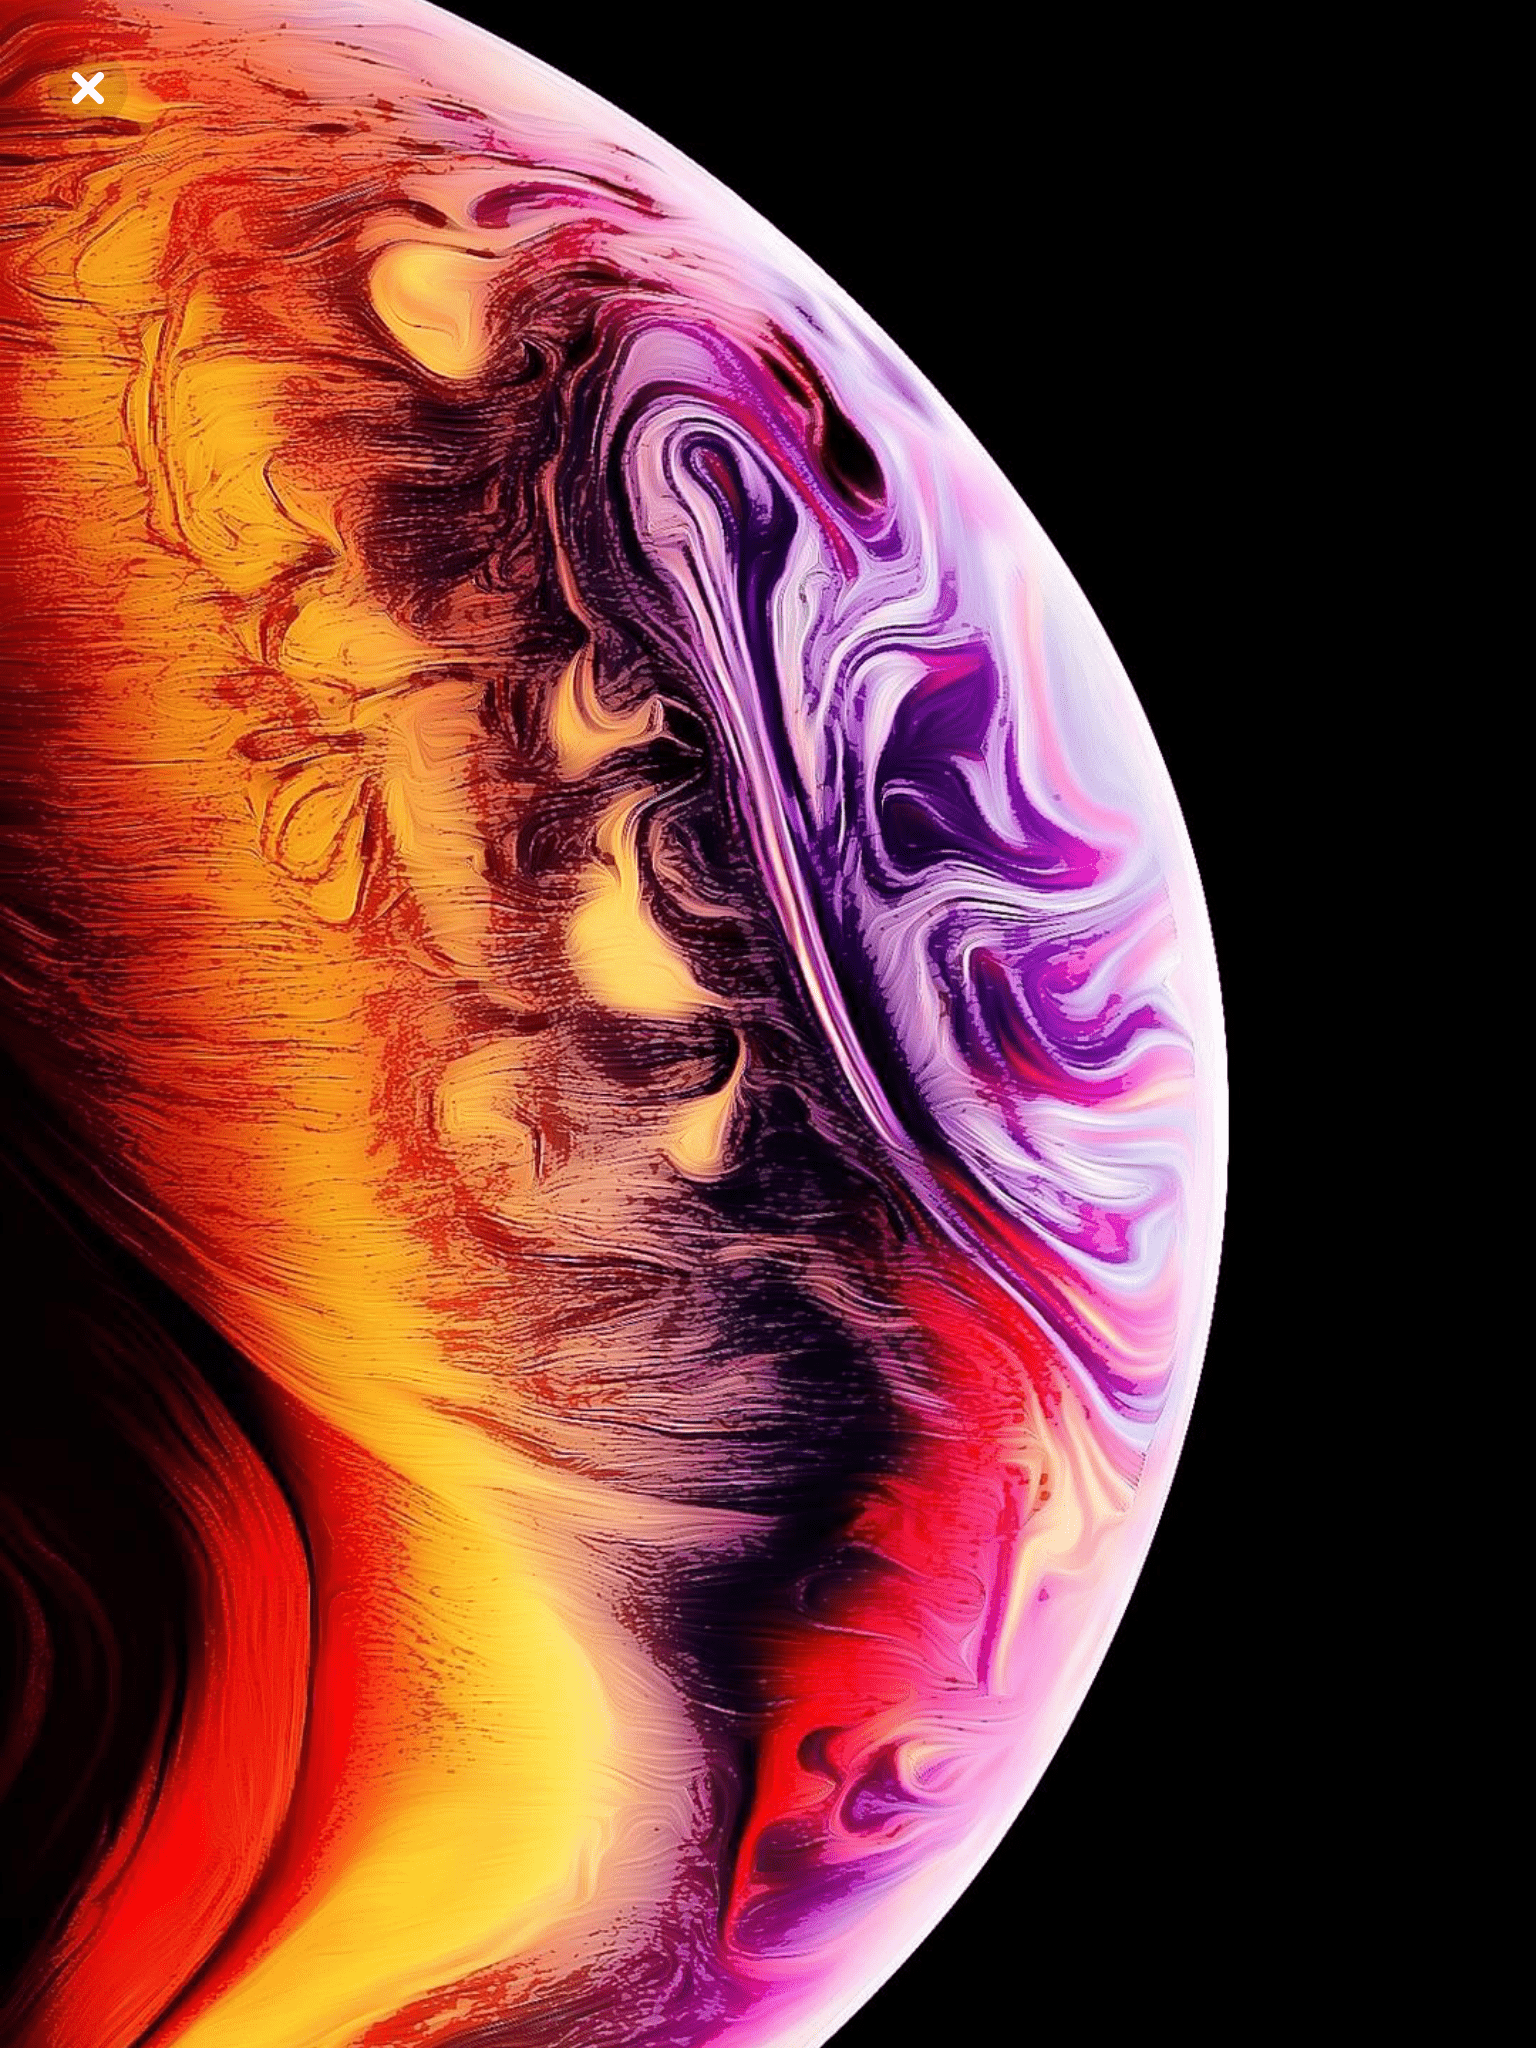 iPhone 11 Pro Max Wallpapers - Top Free iPhone 11 Pro Max Backgrounds